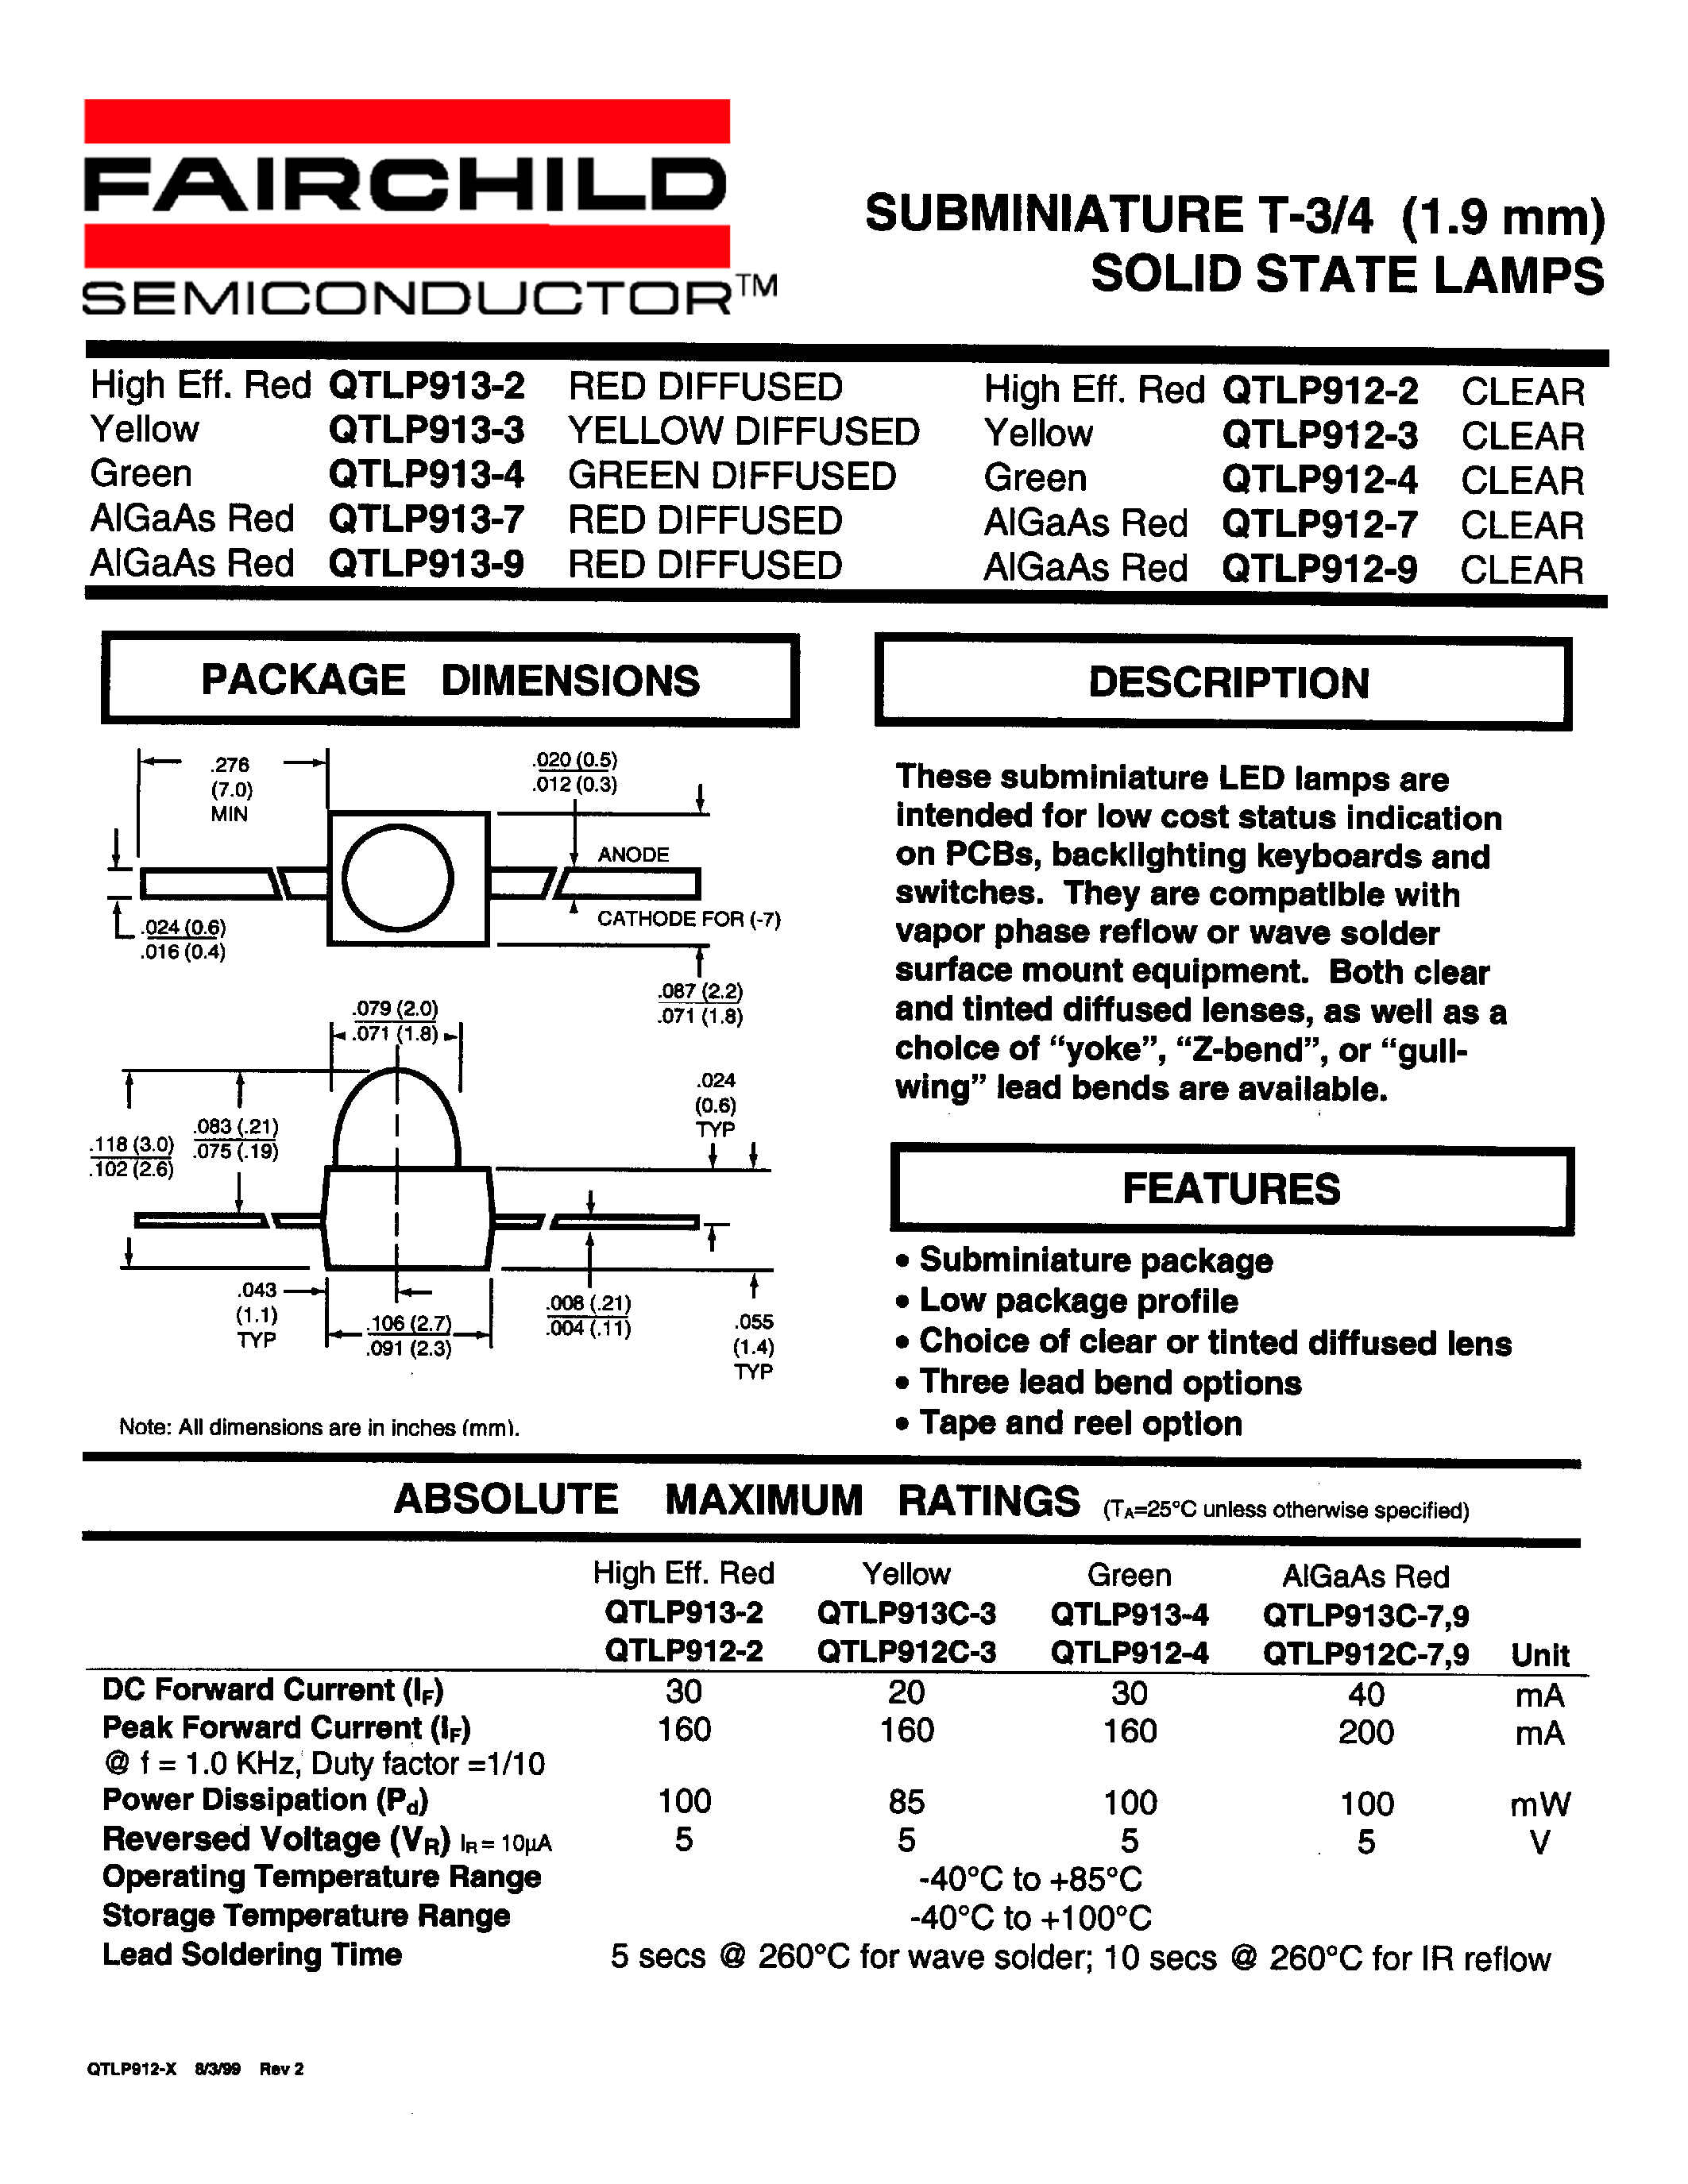 Даташит QTLP913-4 - SUBMINIATURE T-3/4 (1.9 mm) SOLID STATE LAMPS страница 1